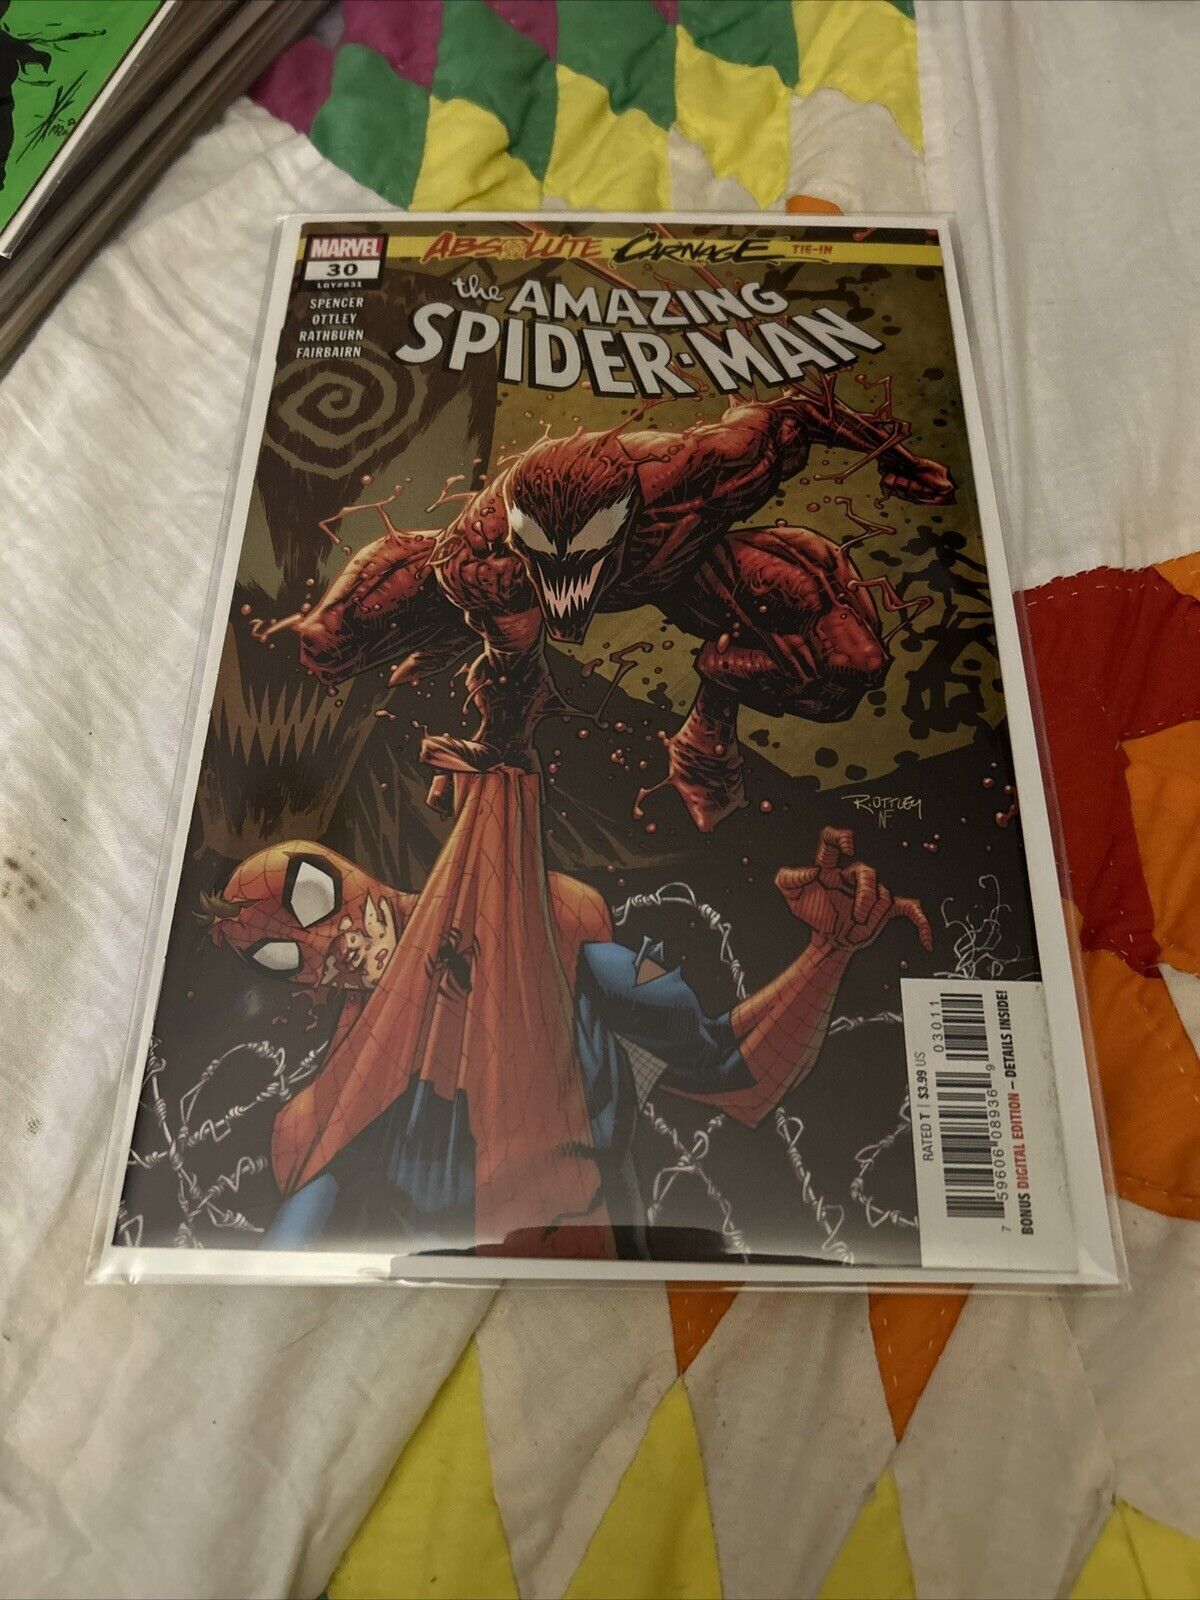 Amazing Spider-Man #30, Vol 5/Lgy #831 (Marvel, 2019) Absolute Carnage Tie-In